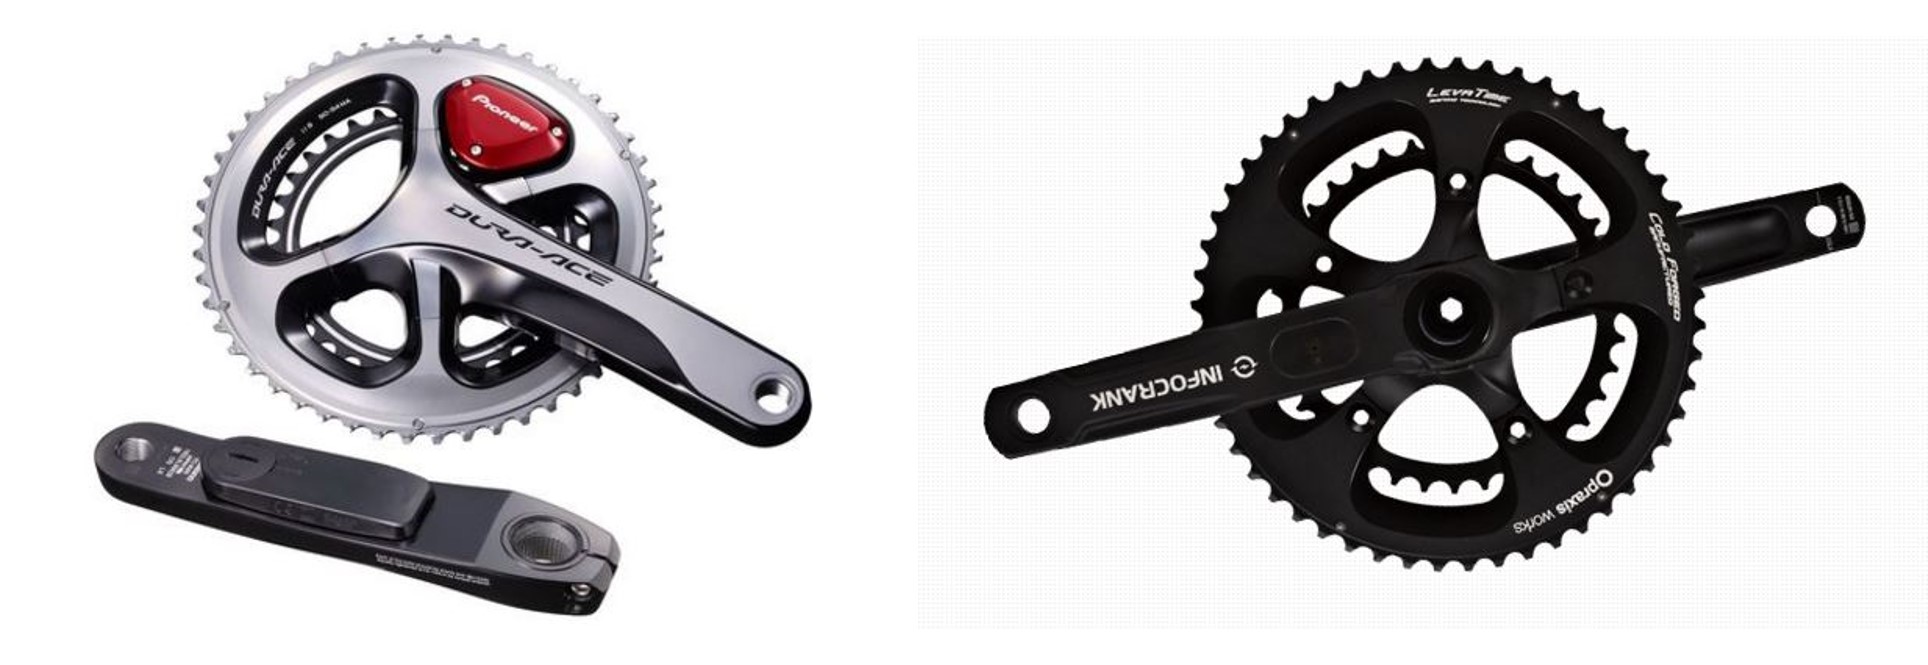 Crank powermeter for boost wide or other PM options - Equipment -  TrainerRoad